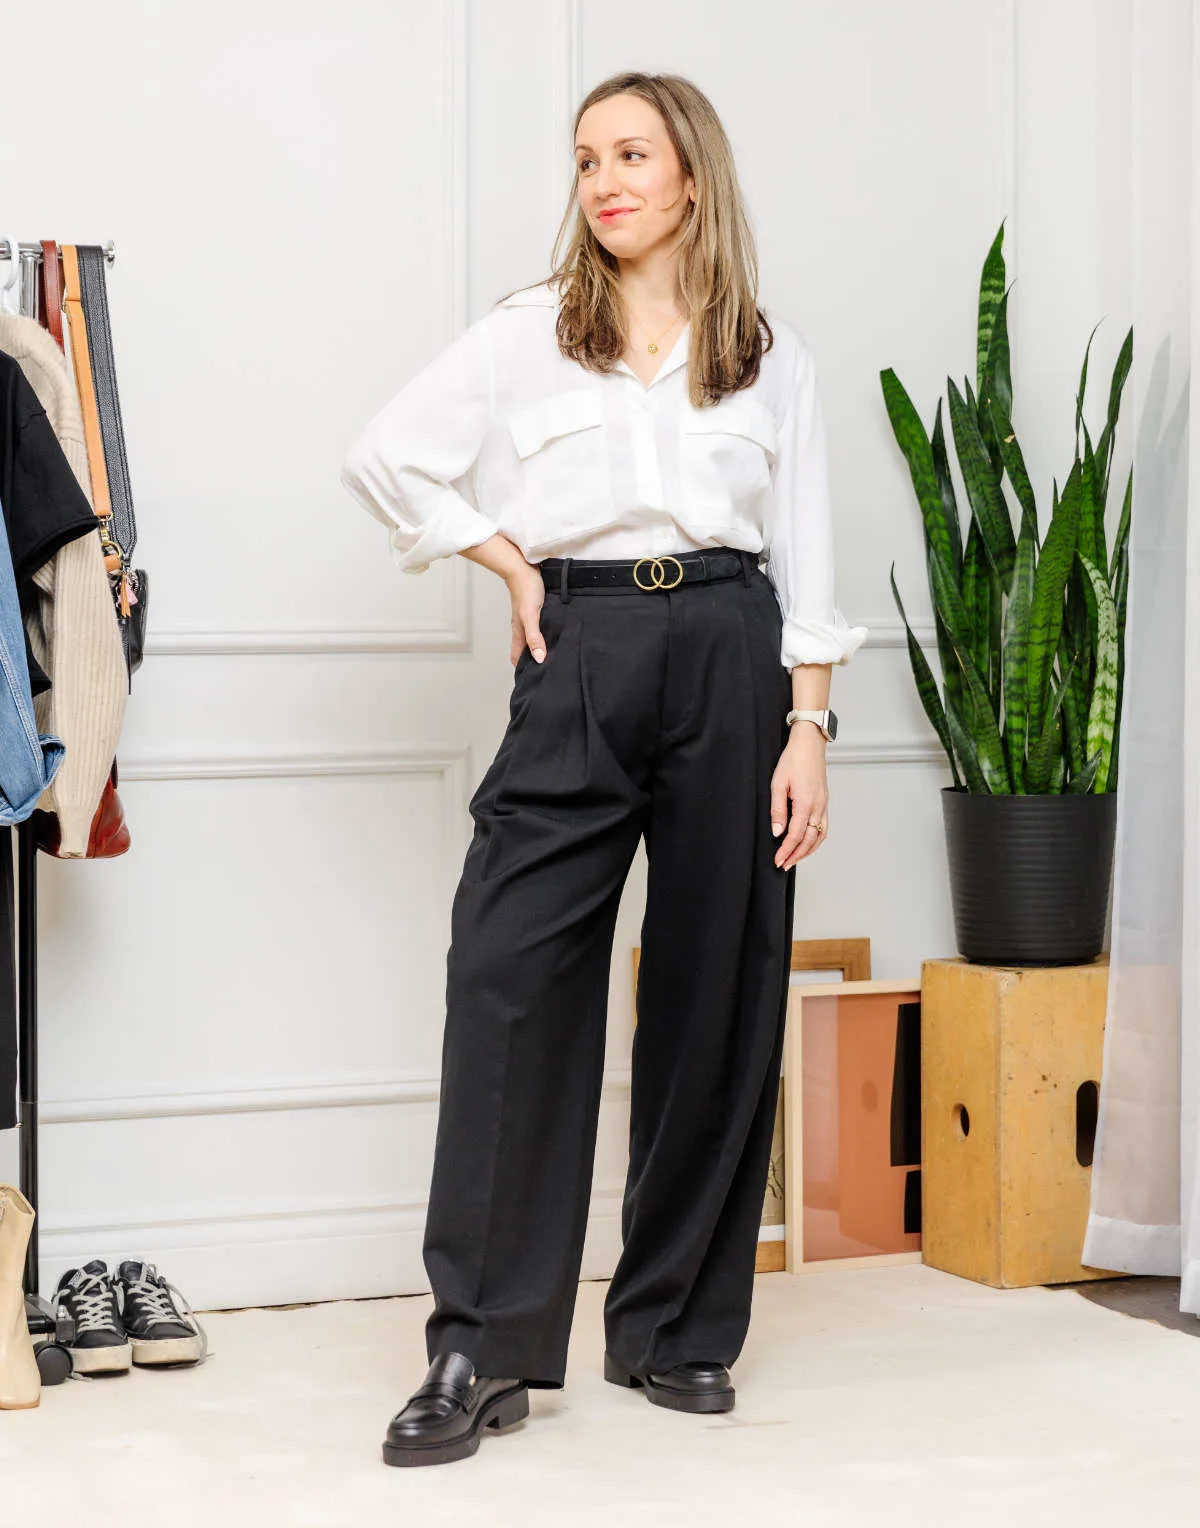 9 Best Navy Wide Leg Pants ideas  work fashion, how to wear, work outfit